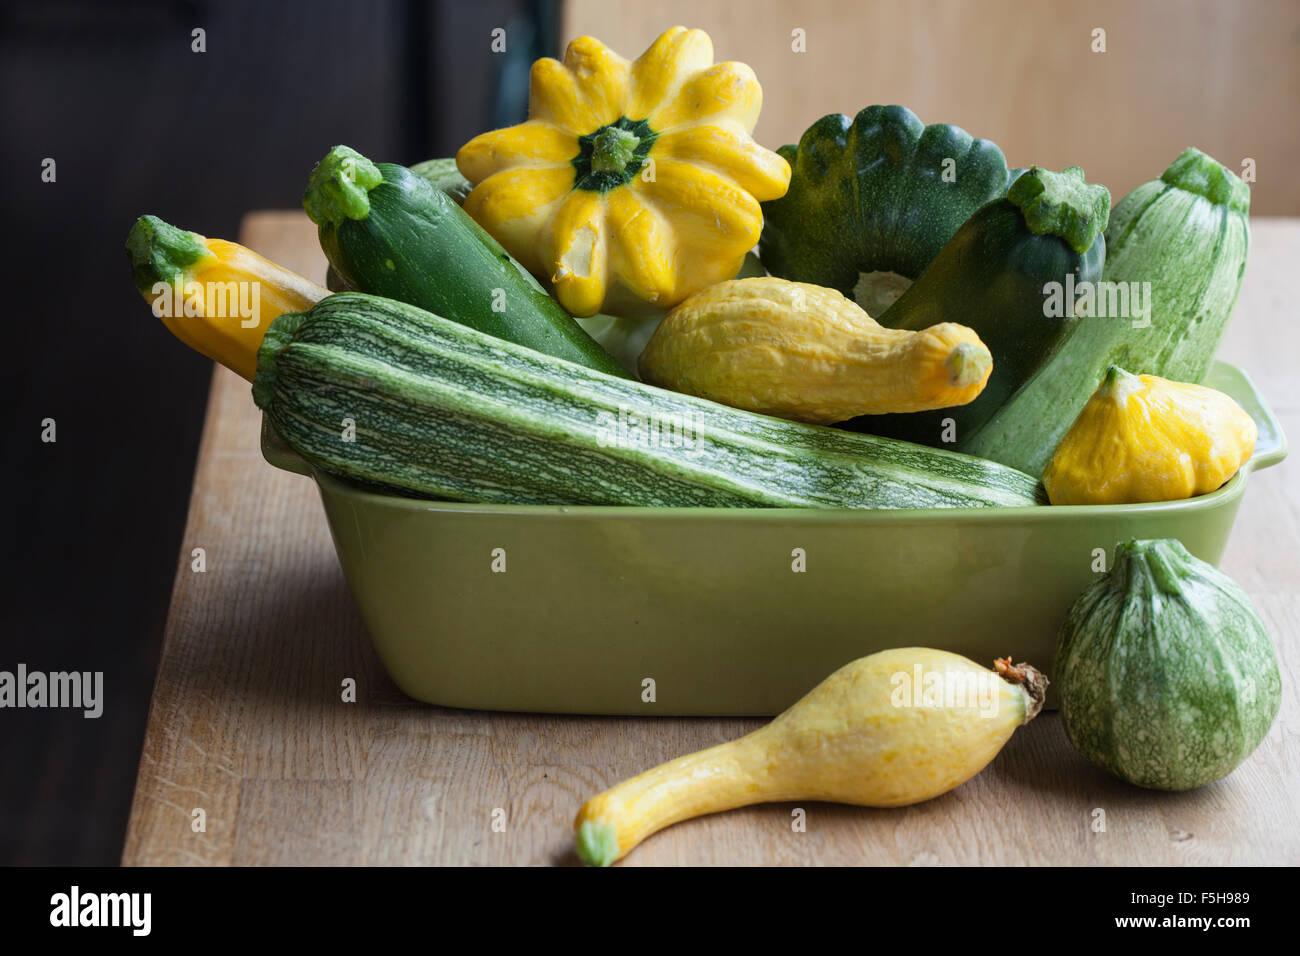 a variety of summer squash in a rectangular green dish, on a table Stock Photo